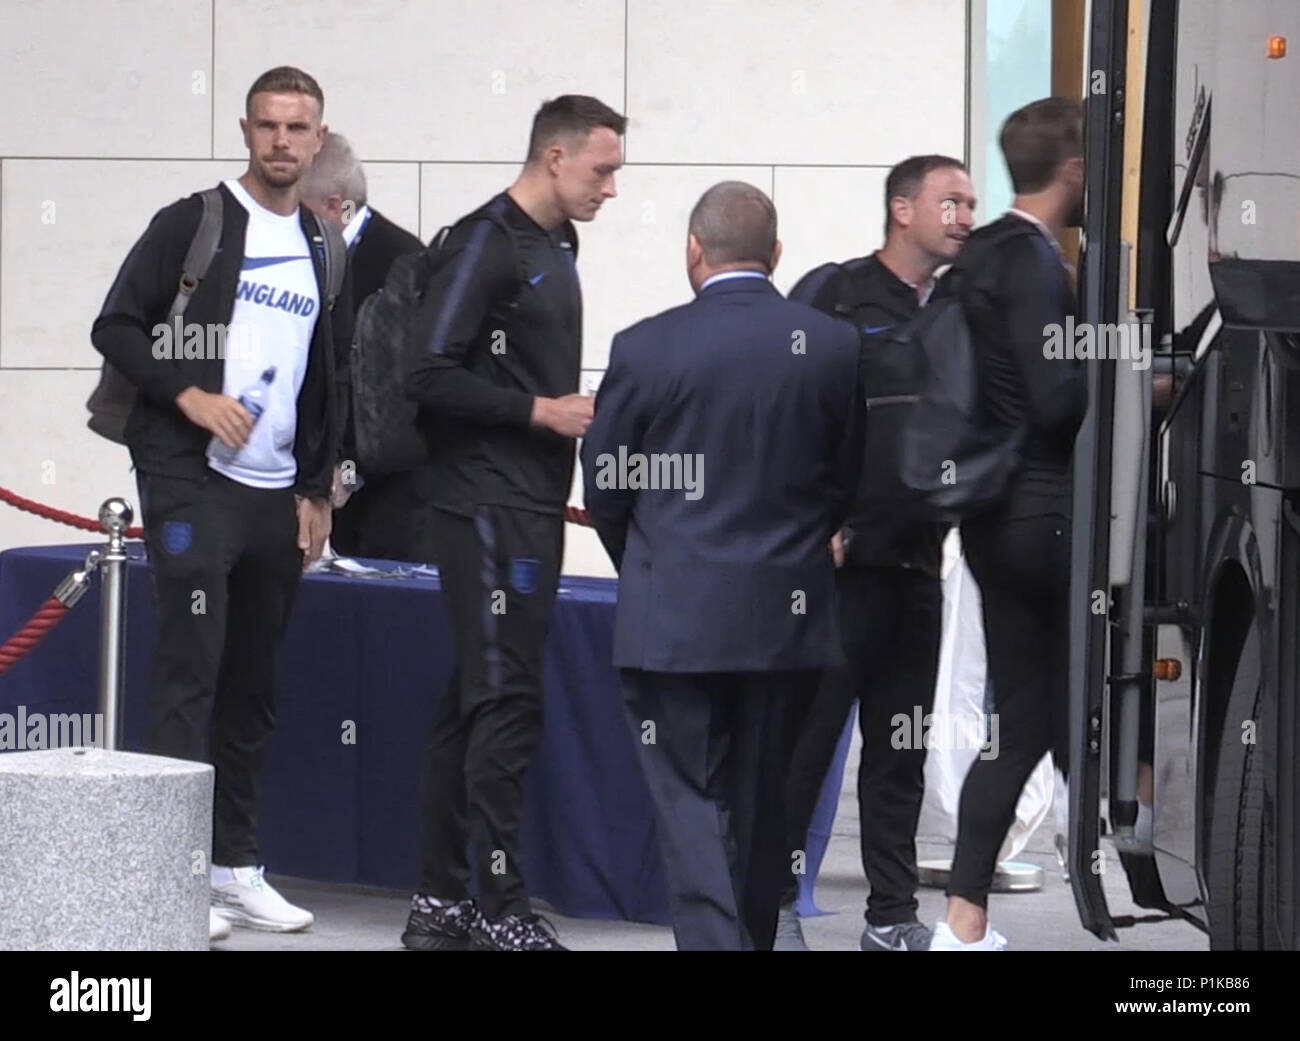 England's Jordan Henderson (left) and Phil Jones (second left) prepare to board the bus at St George's Park in Burton ahead of flying out to Russia for the 2018 FIFA World Cup. Stock Photo